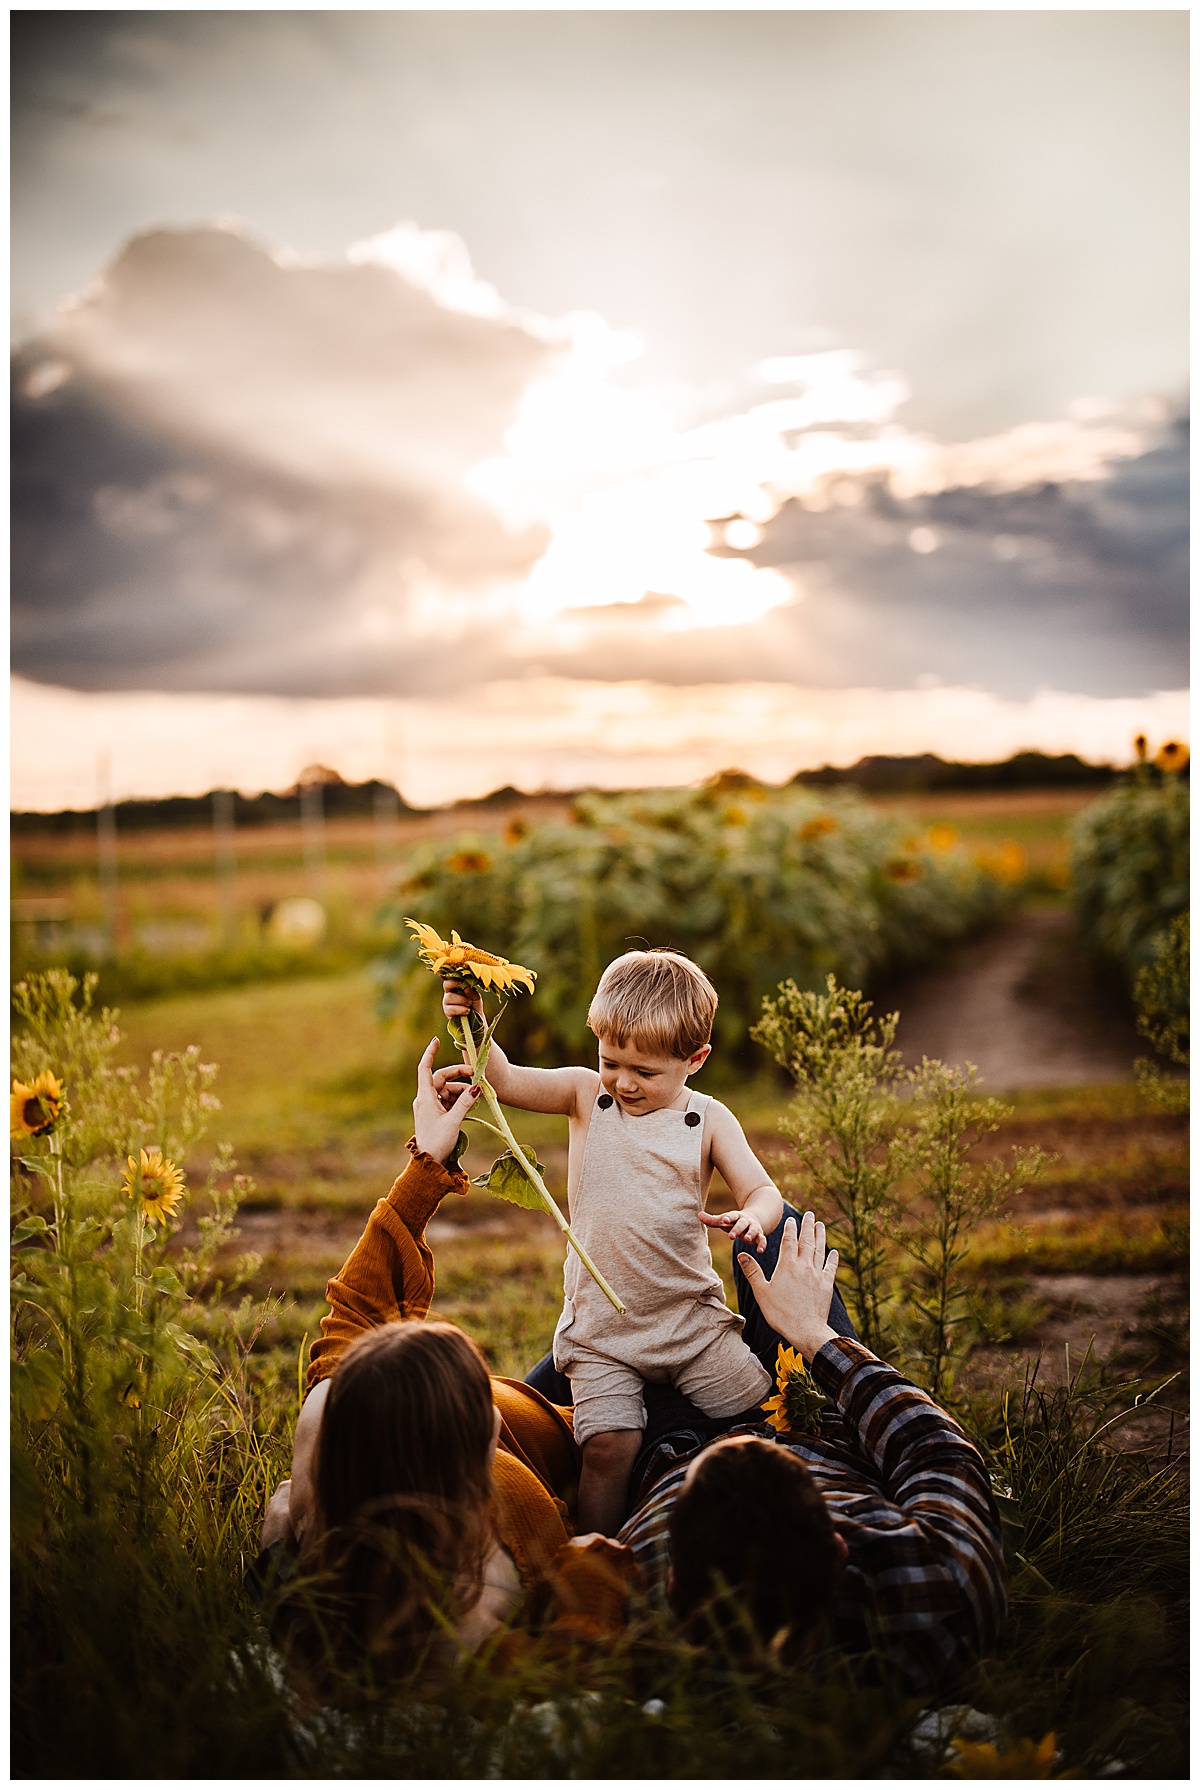 Child grabs flower by Washington DC Family Photographer